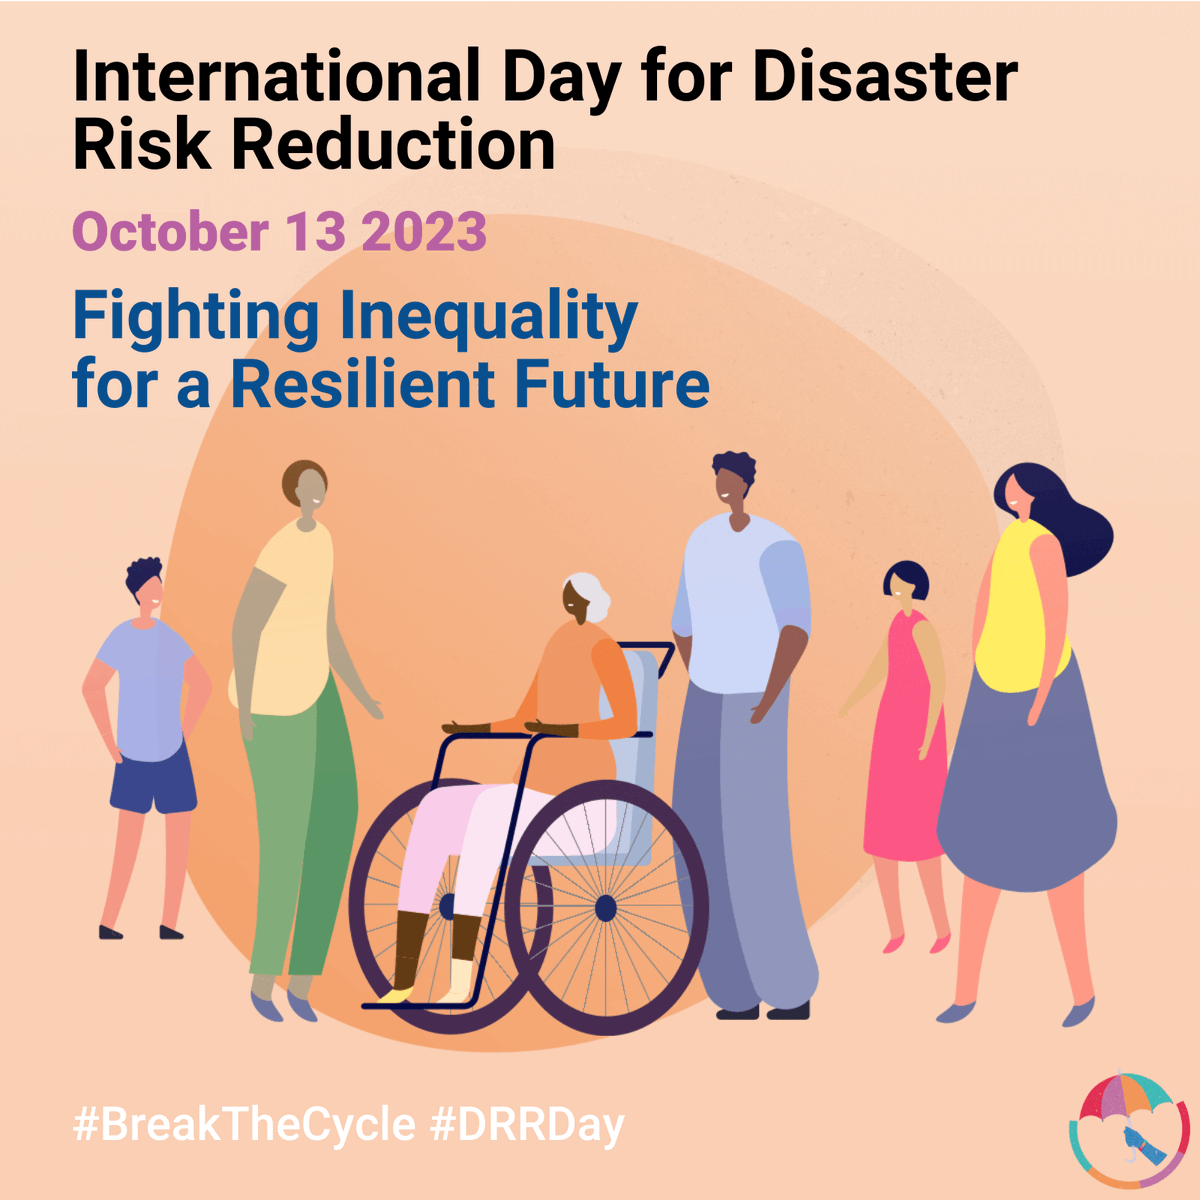 💨🌊 With current climate projections, the world will face some 560 disasters per year by 2030 - affecting the most vulnerable most severely.

With the #GlobalStocktake guiding the way, #COP28 is a moment to course-correct and build #ResilienceForAll.

#DRRDay